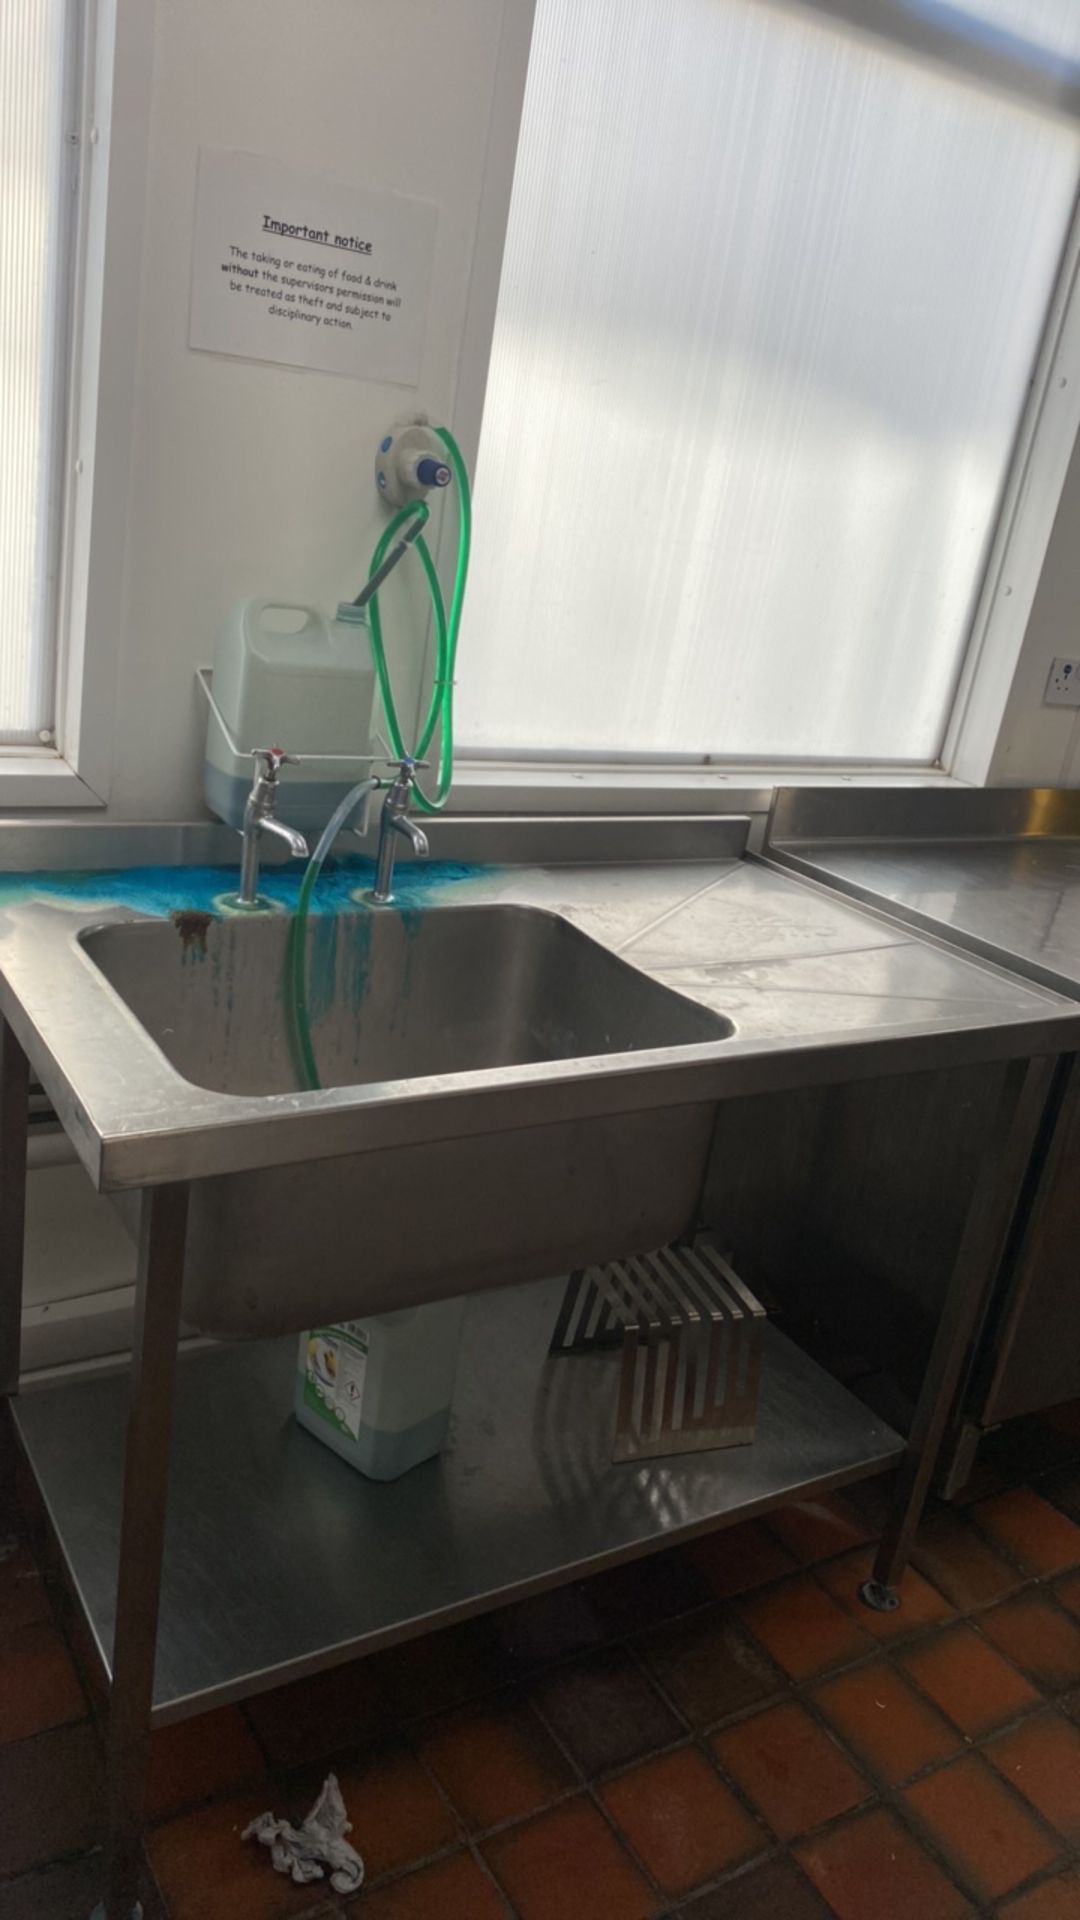 Stainless Steel Sink Unit - Image 4 of 7